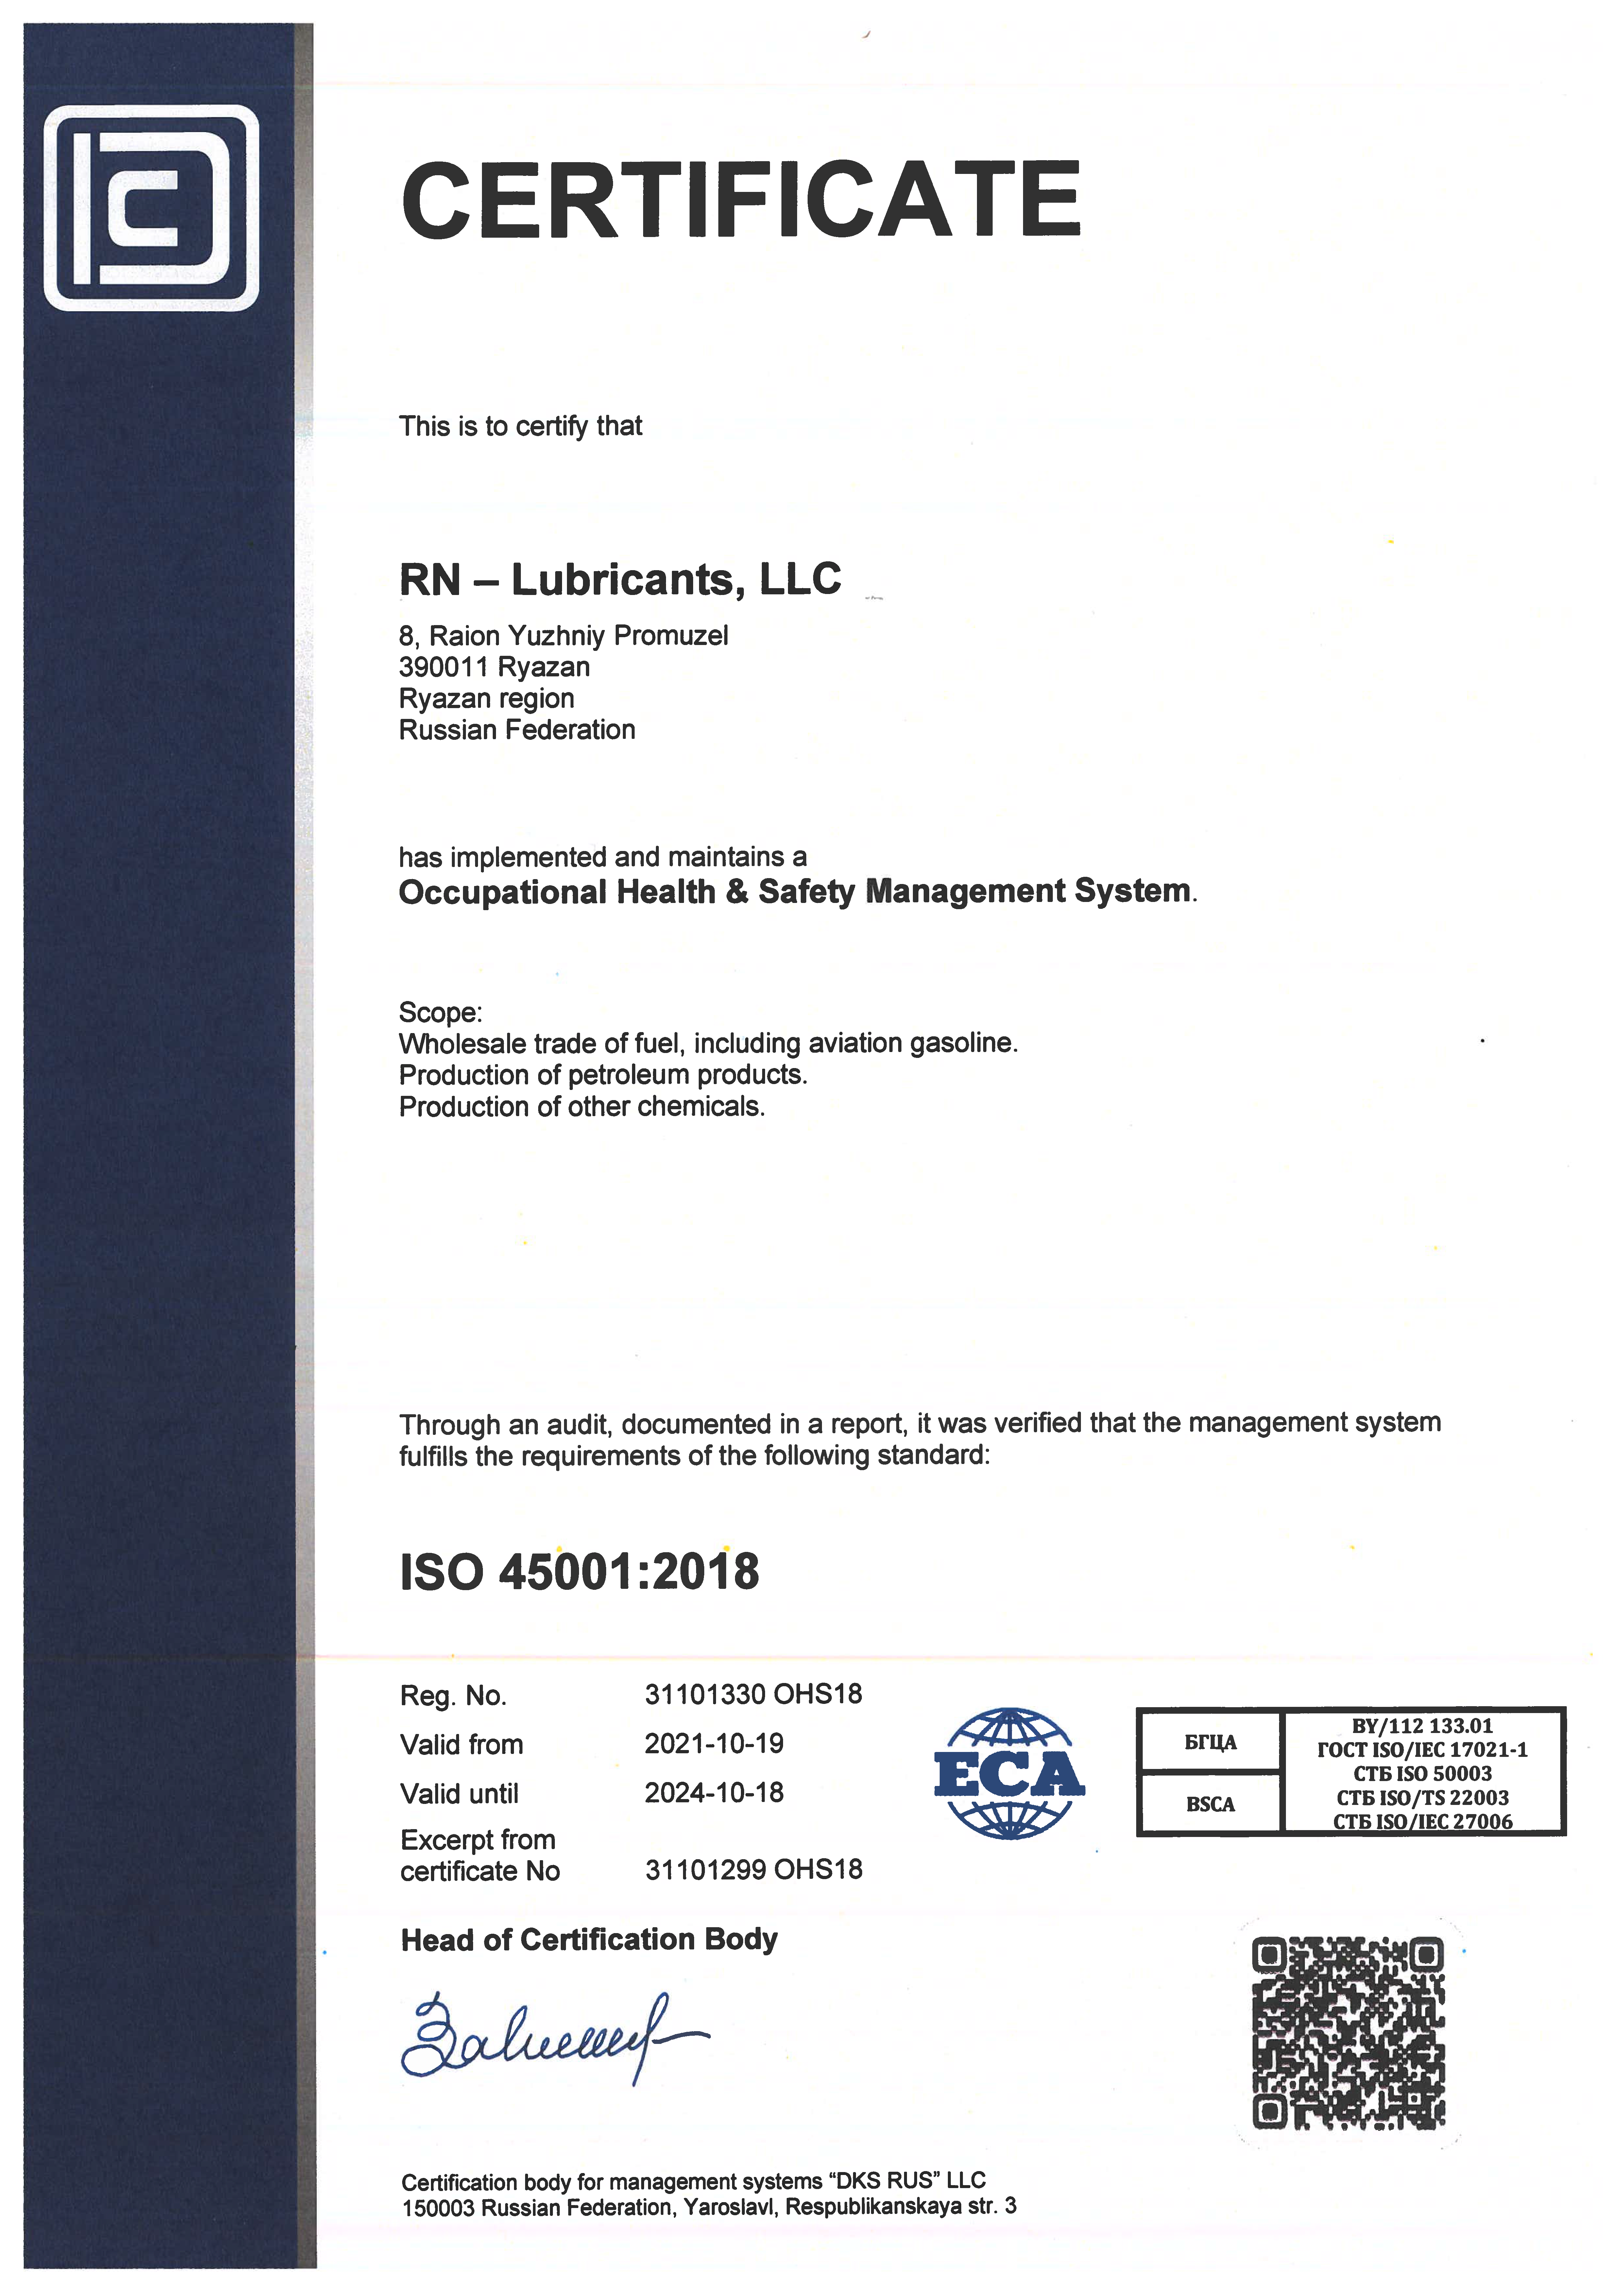 Certificate ISO 45001:2018